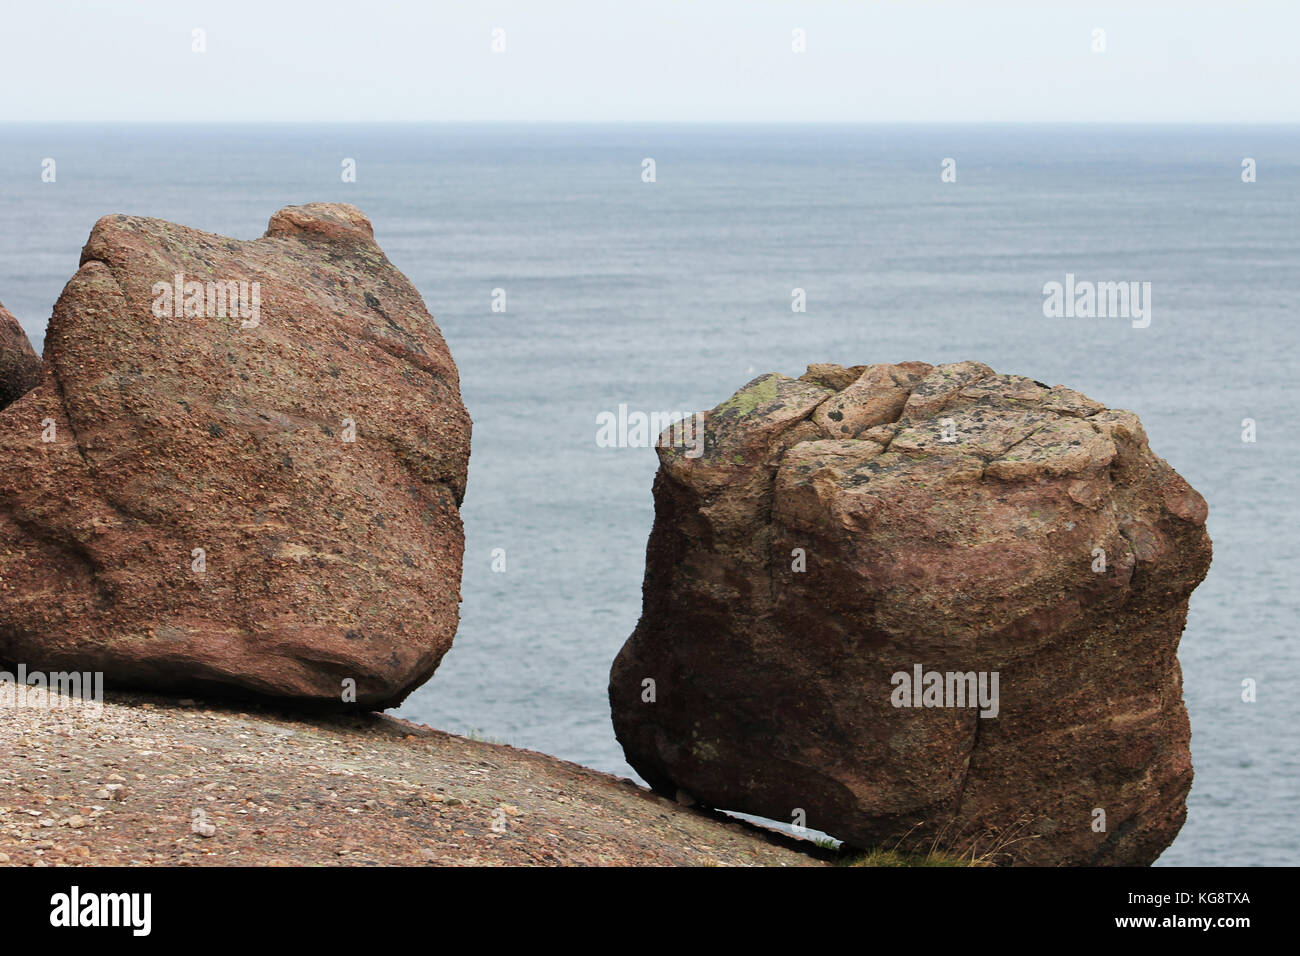 Two large boulders resting on the edge of the cliff, against a background of blue water and blue sky, Signal Hill, Newfoundland.. Stock Photo